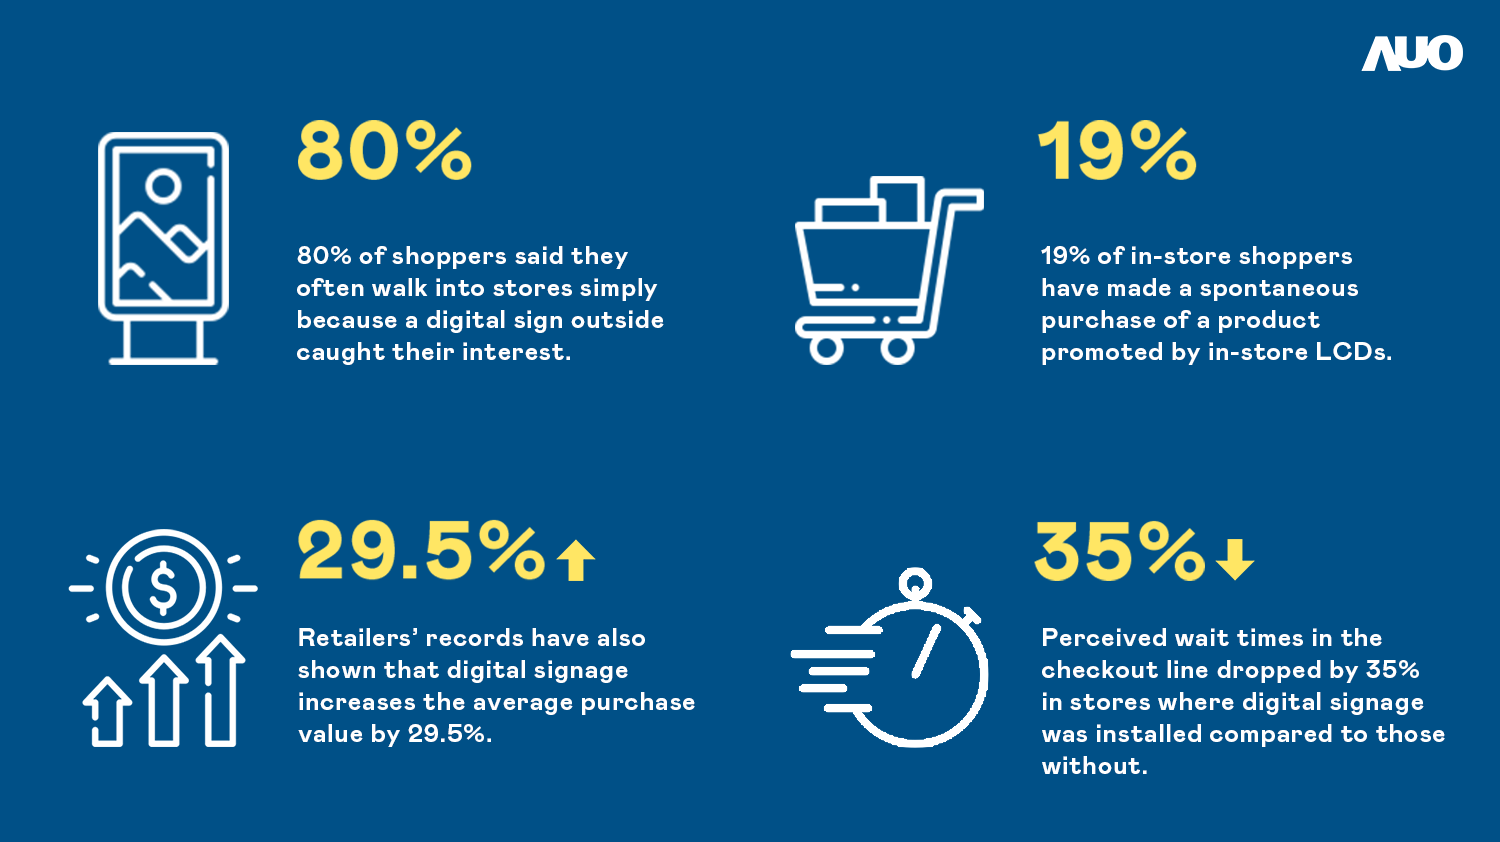 These survey results are in line with reports from businesses, which have found that sales rise by up to 80% after implementing digital signage. Retailers’ records have also shown that digital signage increases the average purchase value by 29.5%. Digital signage even helps keep customers occupied when they wait in line. Customer surveys showed that perceived wait times in the checkout line dropped by 35% in stores where digital signage was installed compared to those without.